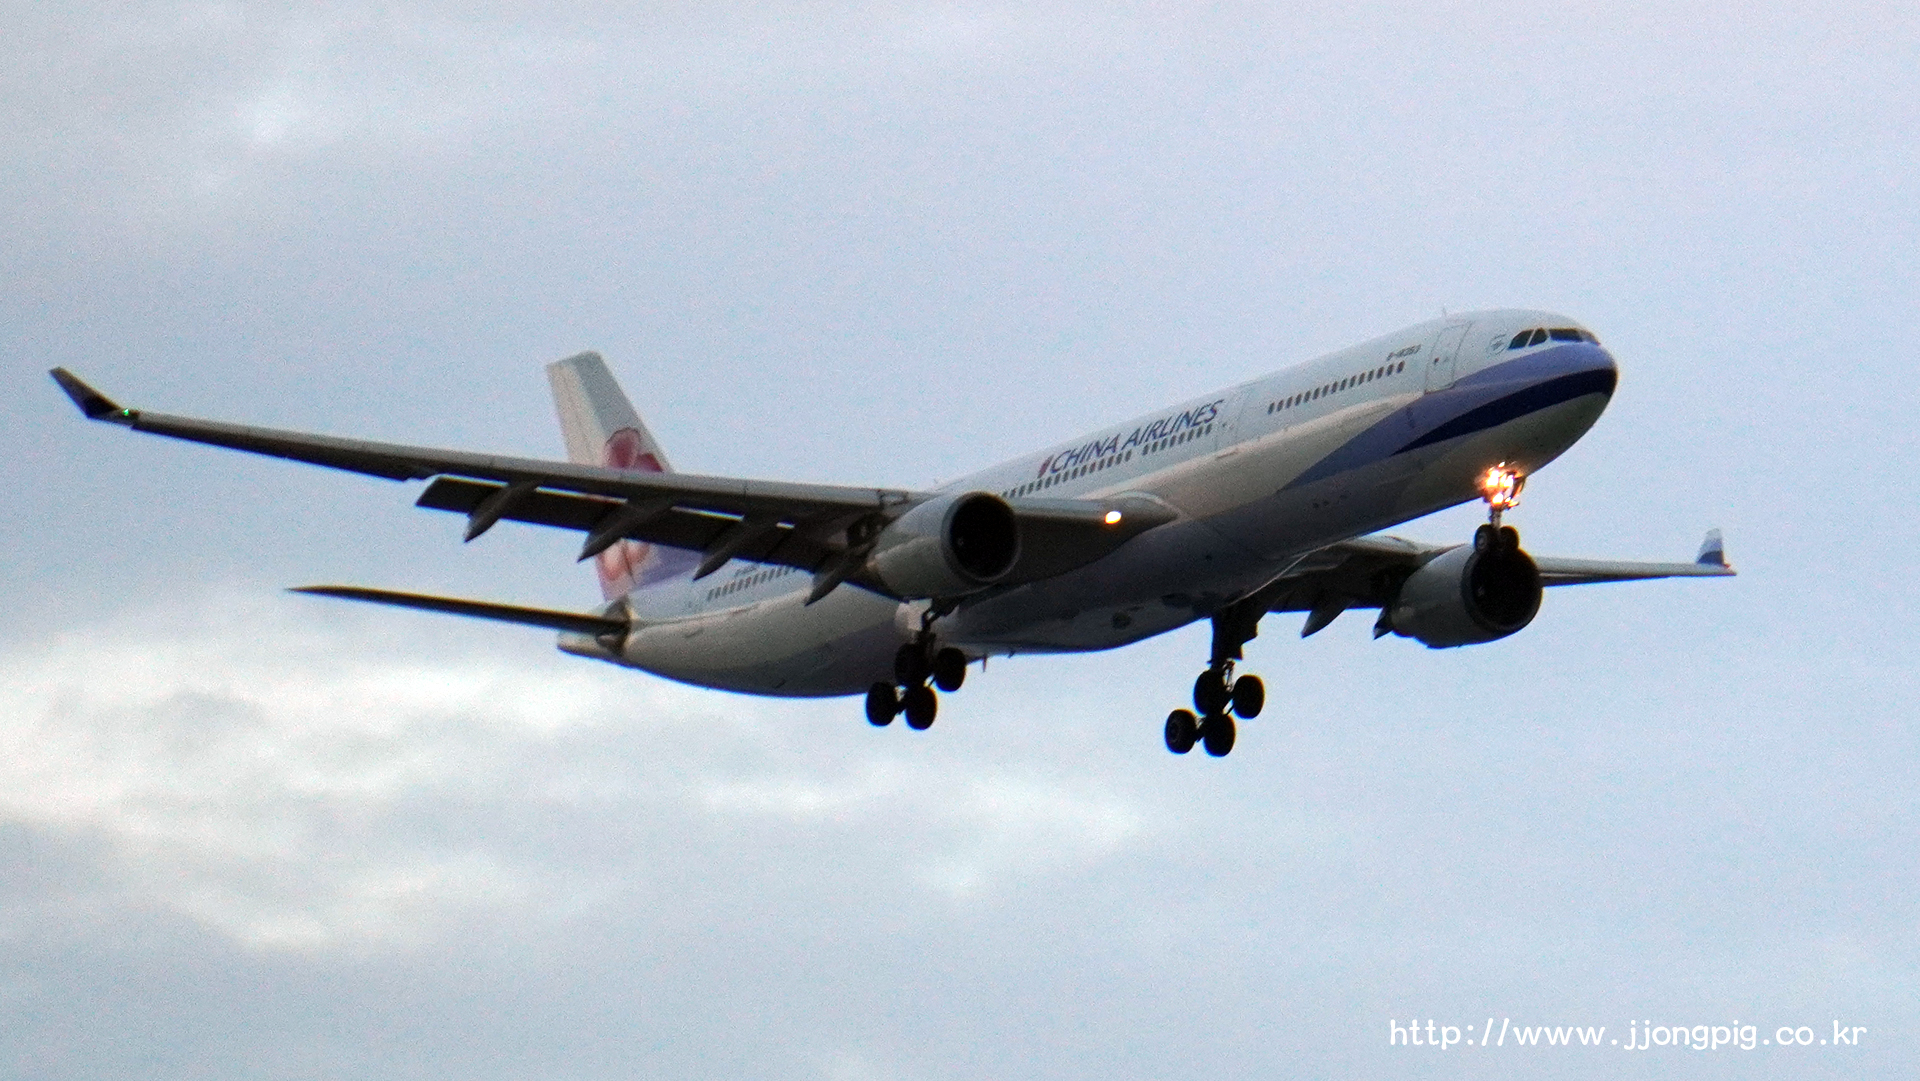 China Airlines B-18353 Airbus A330-300